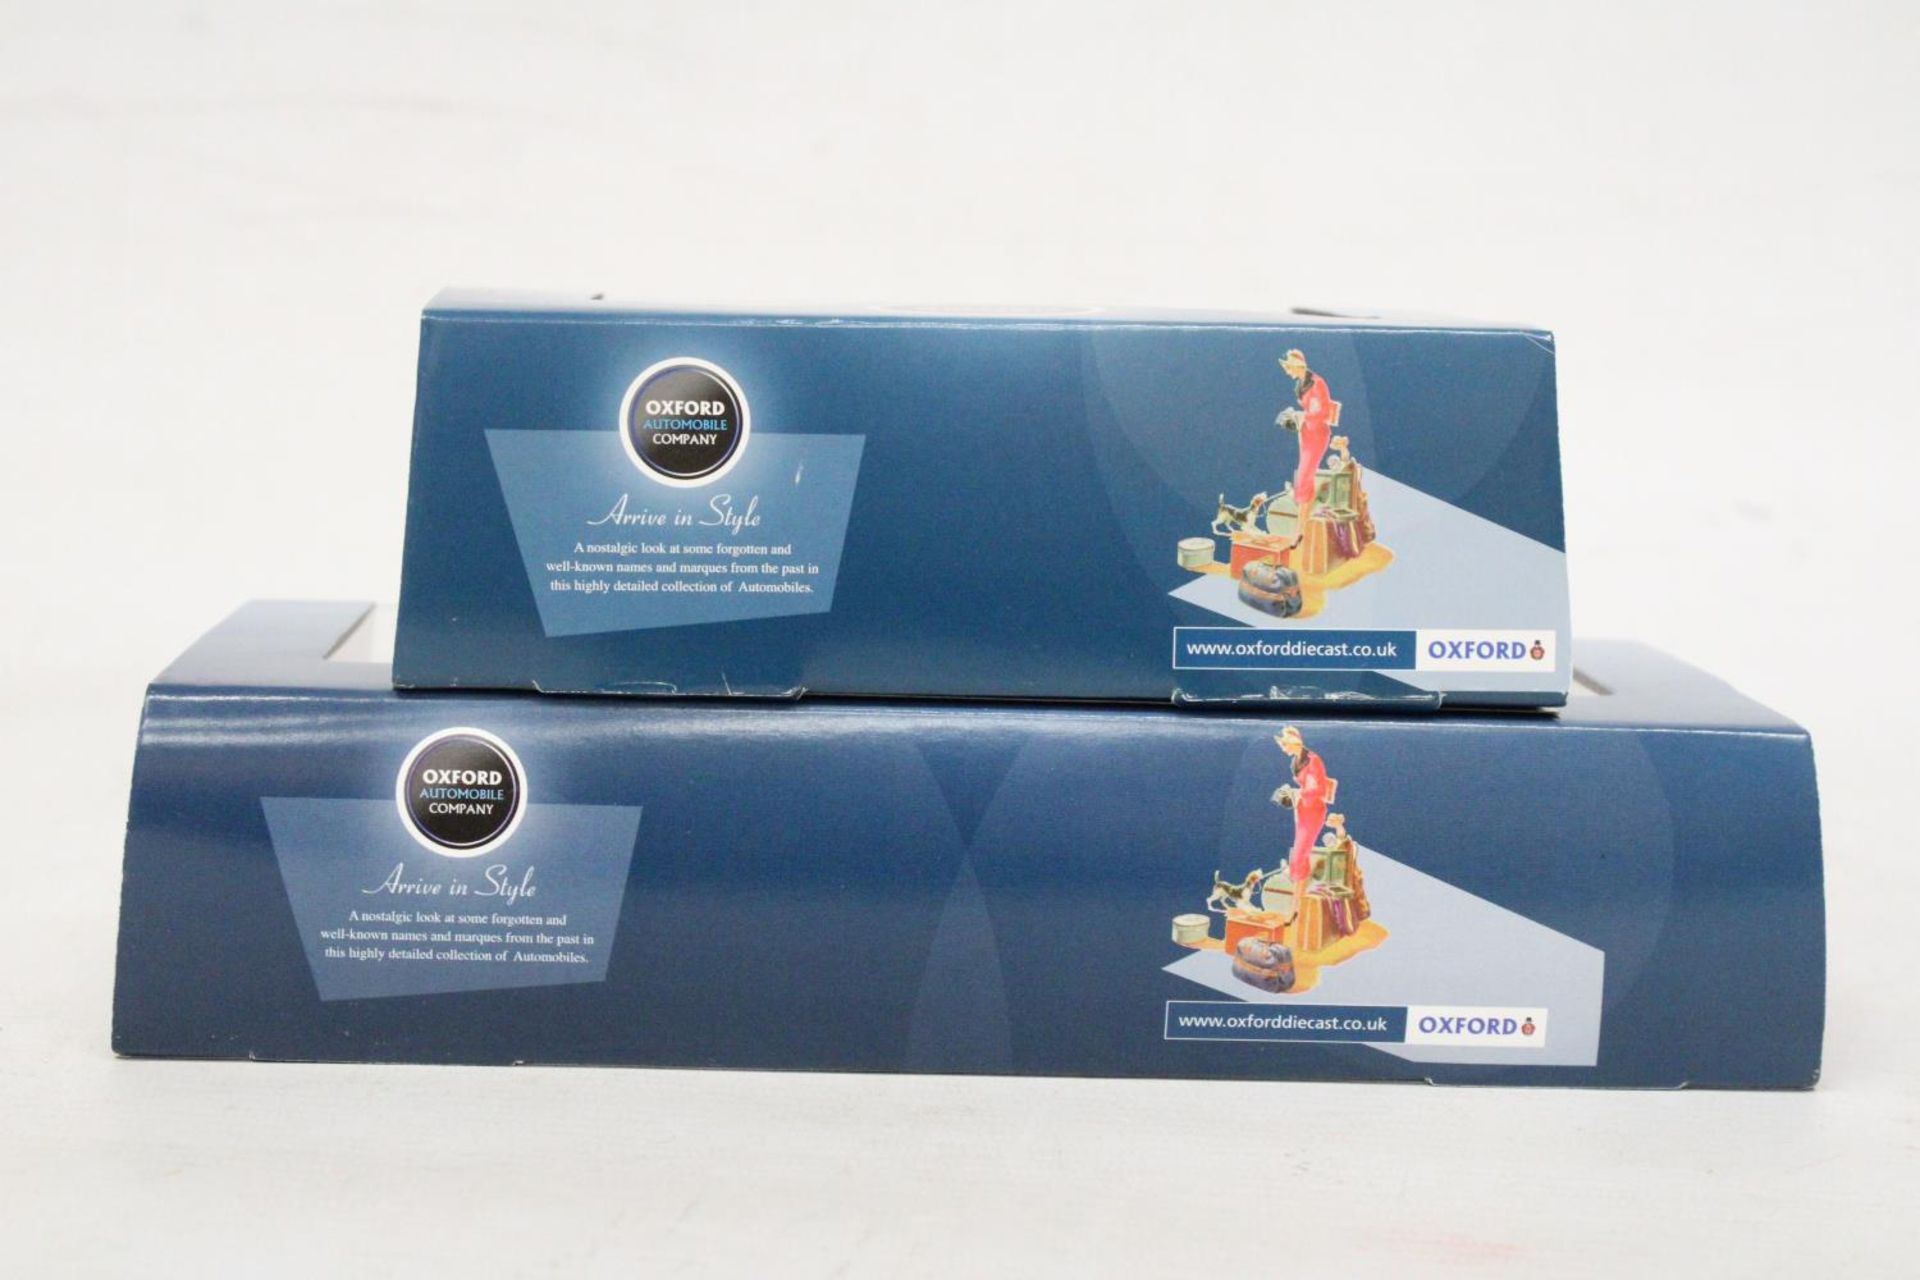 TWO OXFORD AS NEW AND BOXED AUTOMOBILE COMPANY SETS TO INCLUDE A FIVE PIECE MG SET AND A THREE PIECE - Image 7 of 8